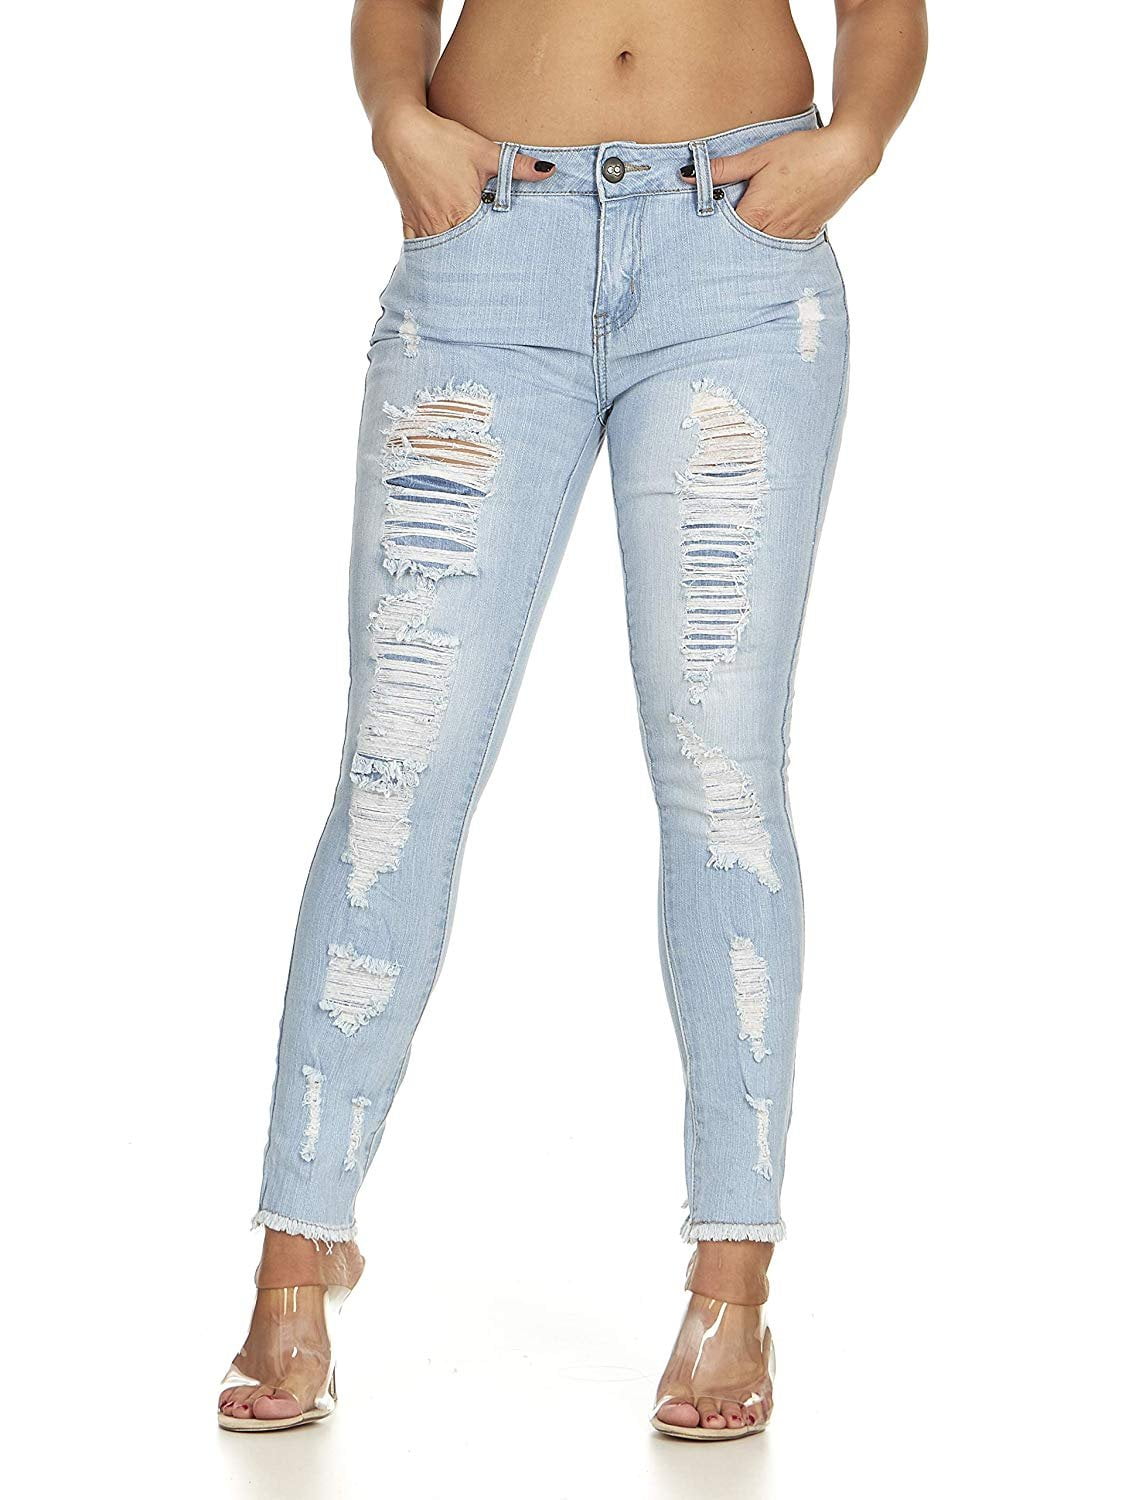 V.I.P.JEANS Distressed Skinny Ripped Jeans for Women 